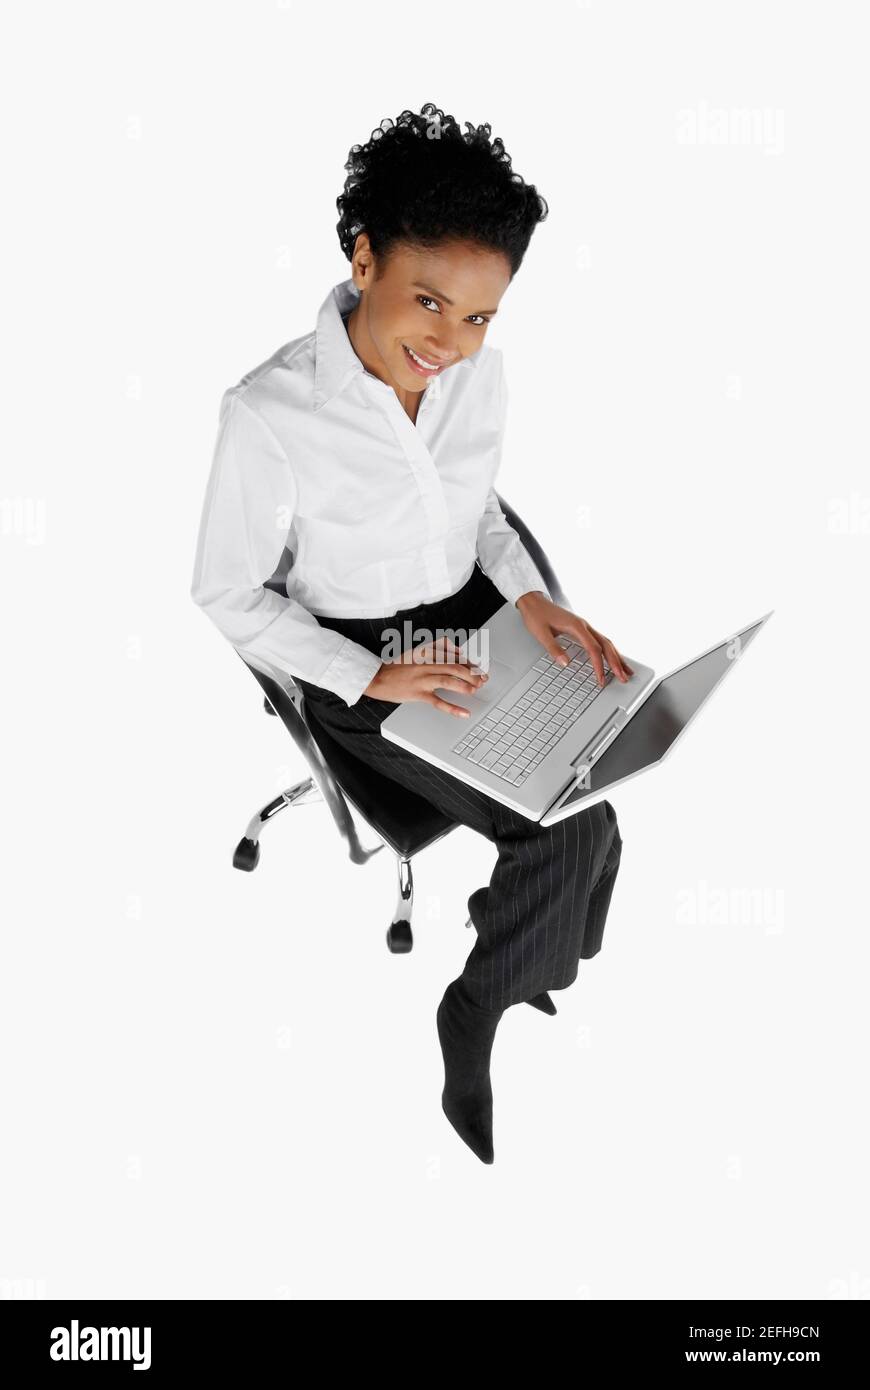 High angle view of a businesswoman using a laptop Banque D'Images